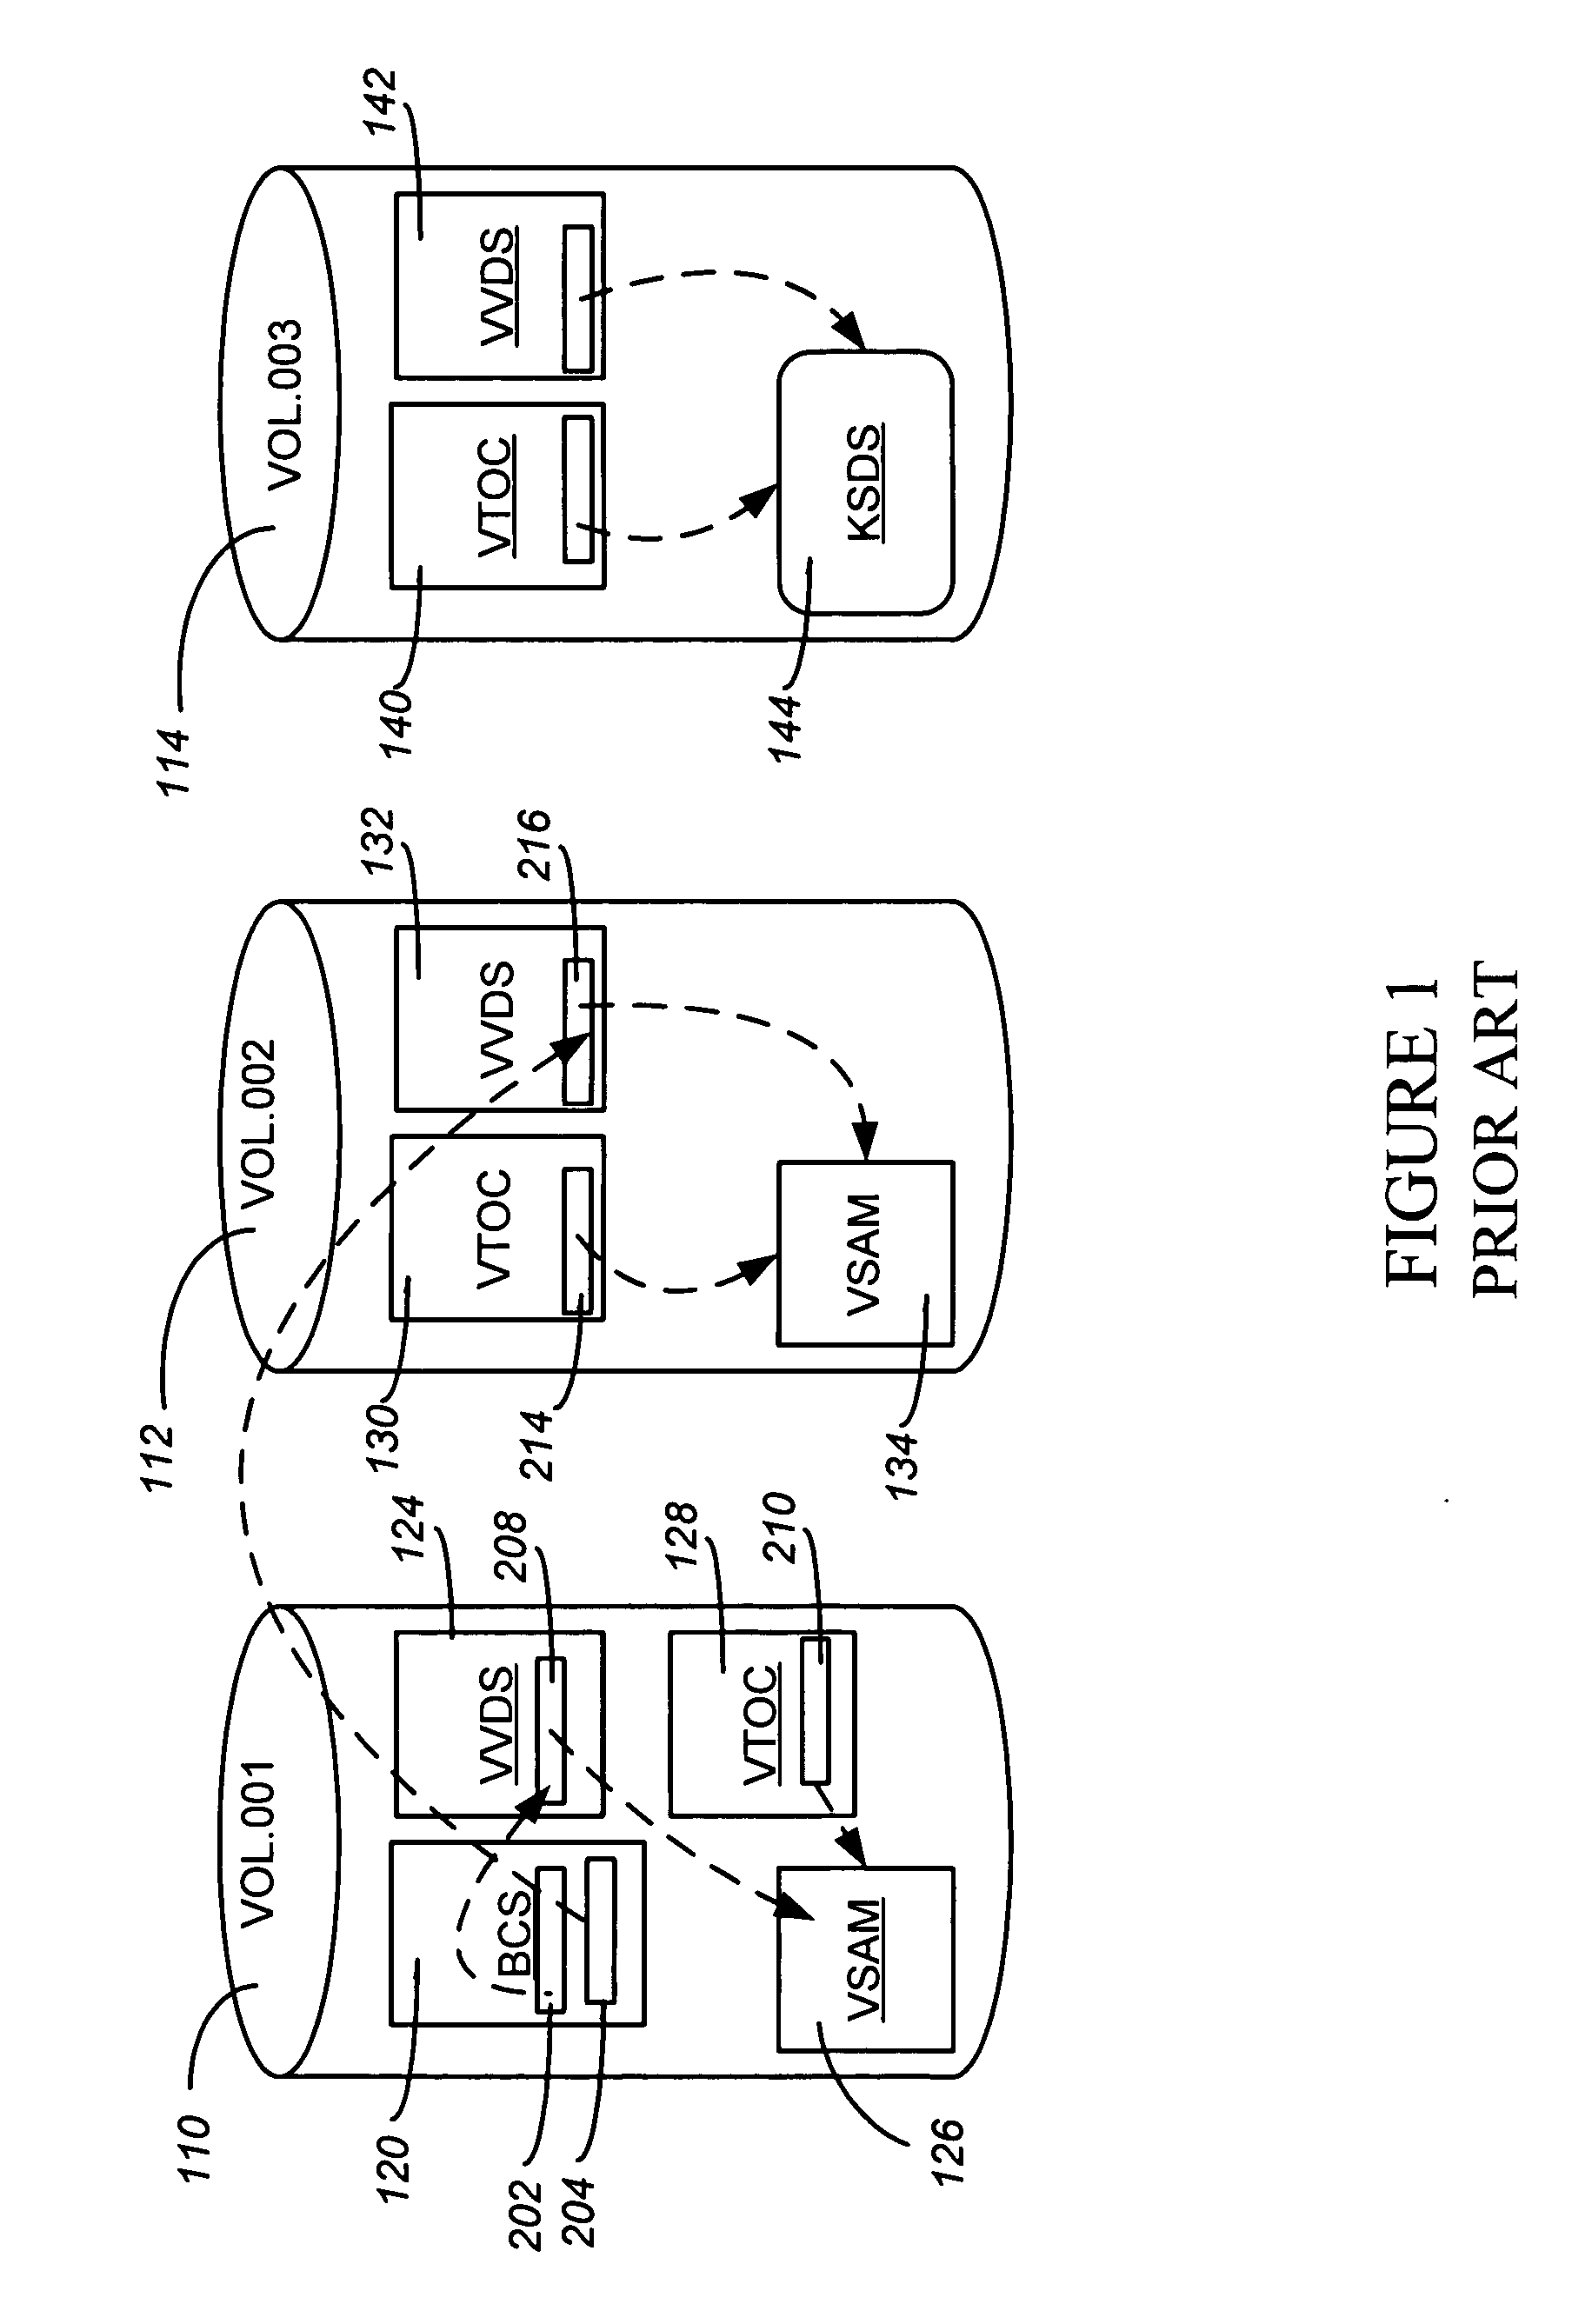 Reorganization and repair of an ICF catalog while open and in-use in a digital data storage system